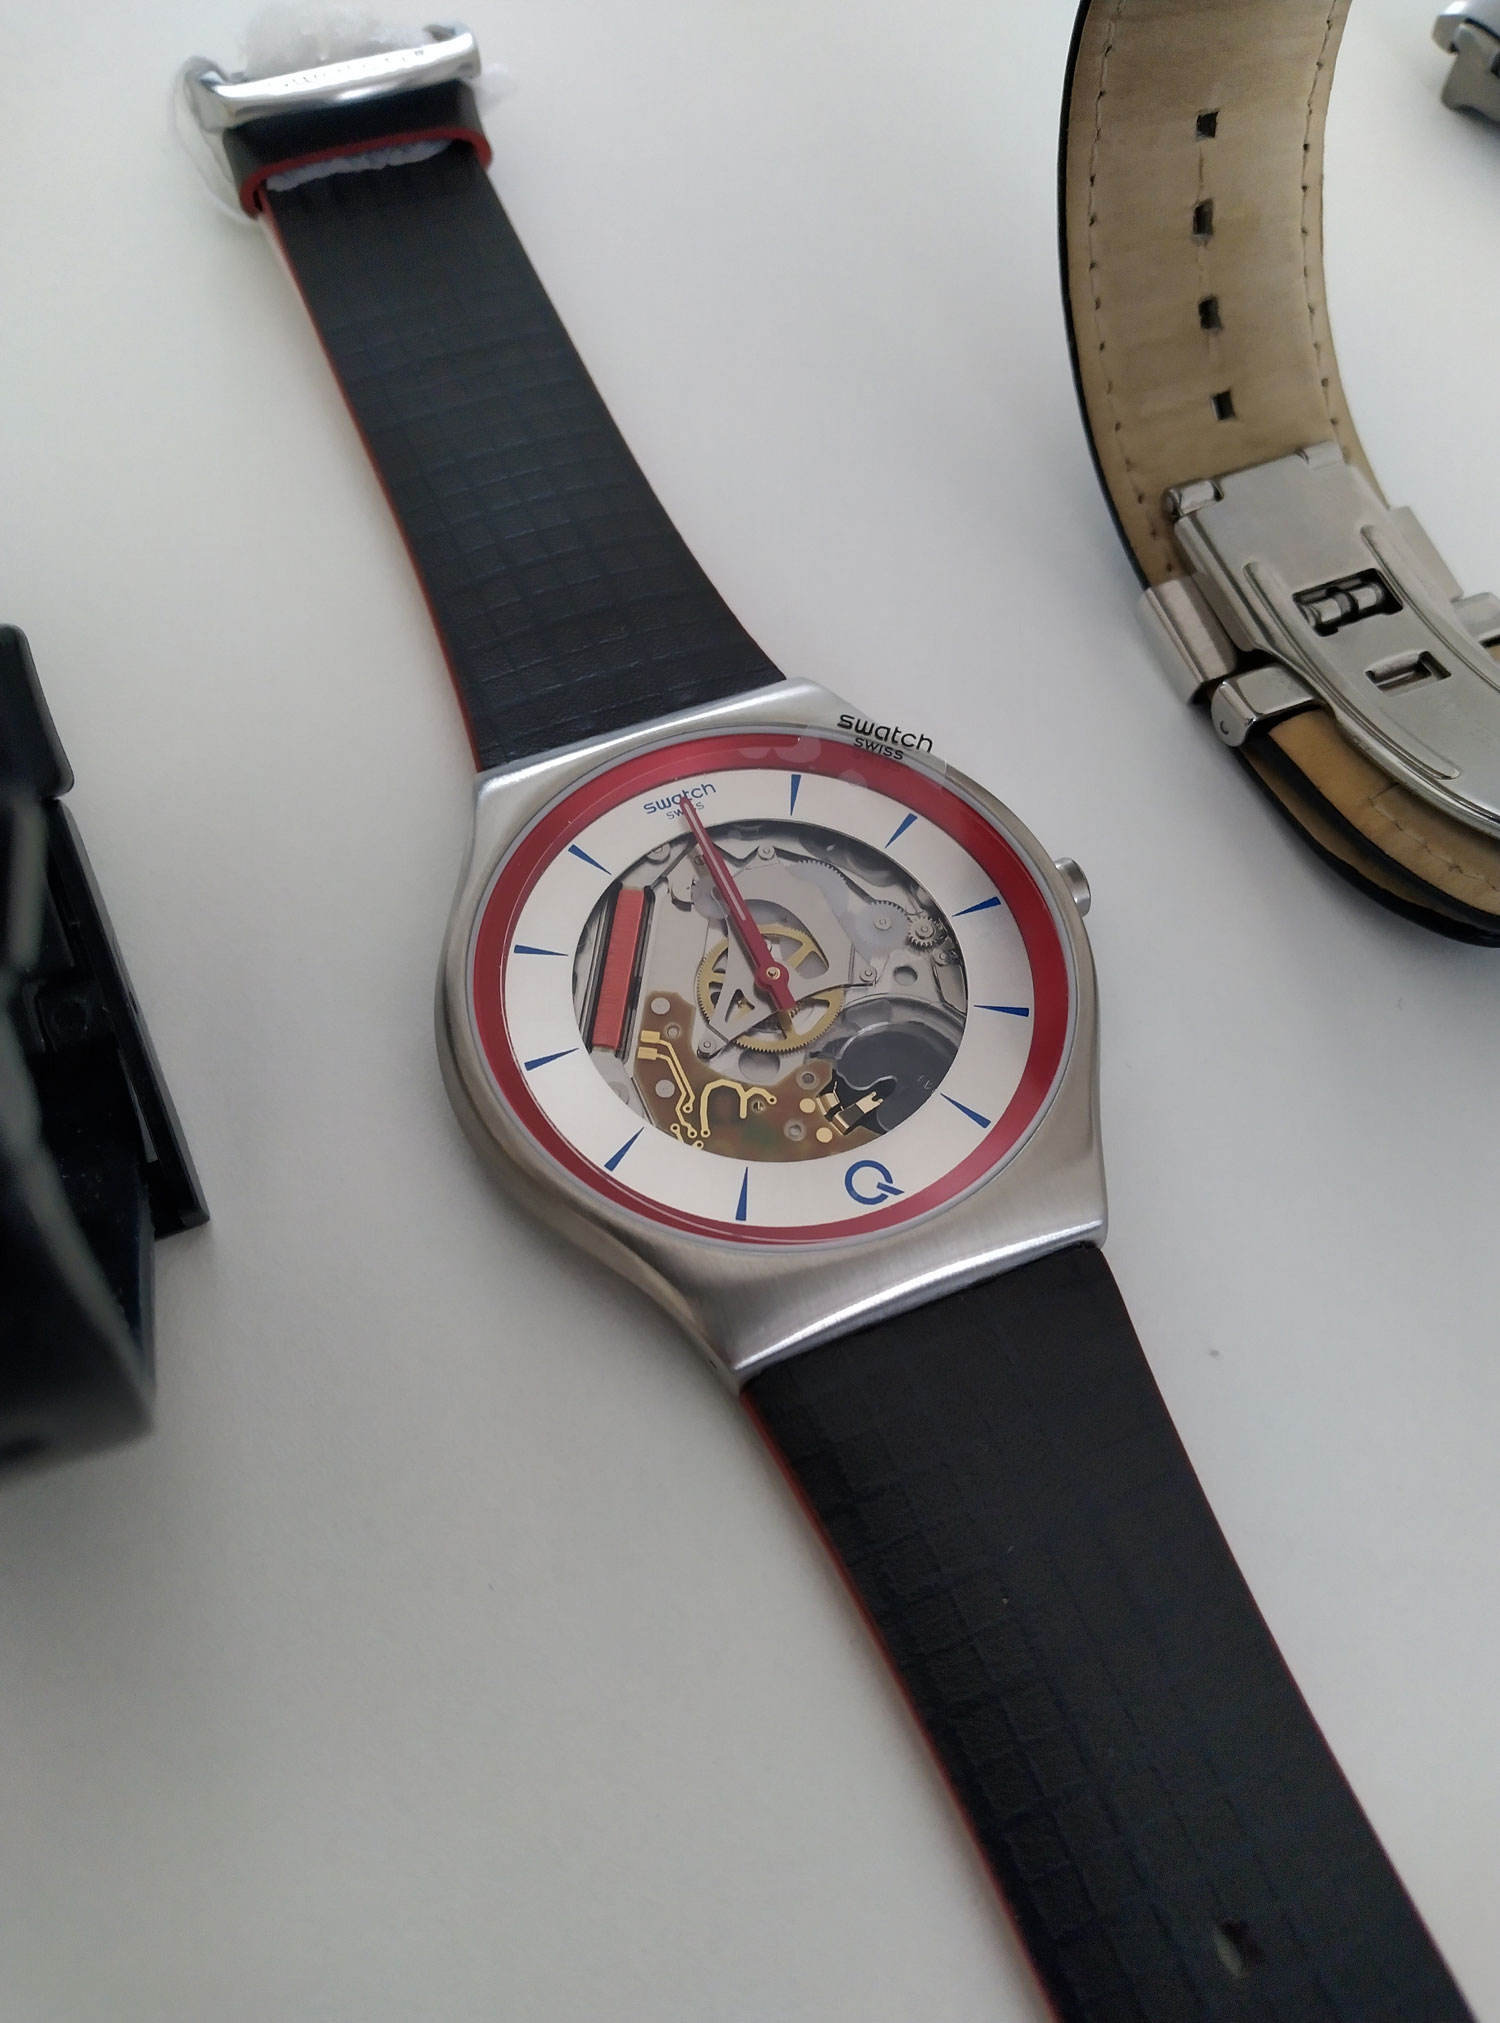 The Swatch Q in the James Bond watch collection